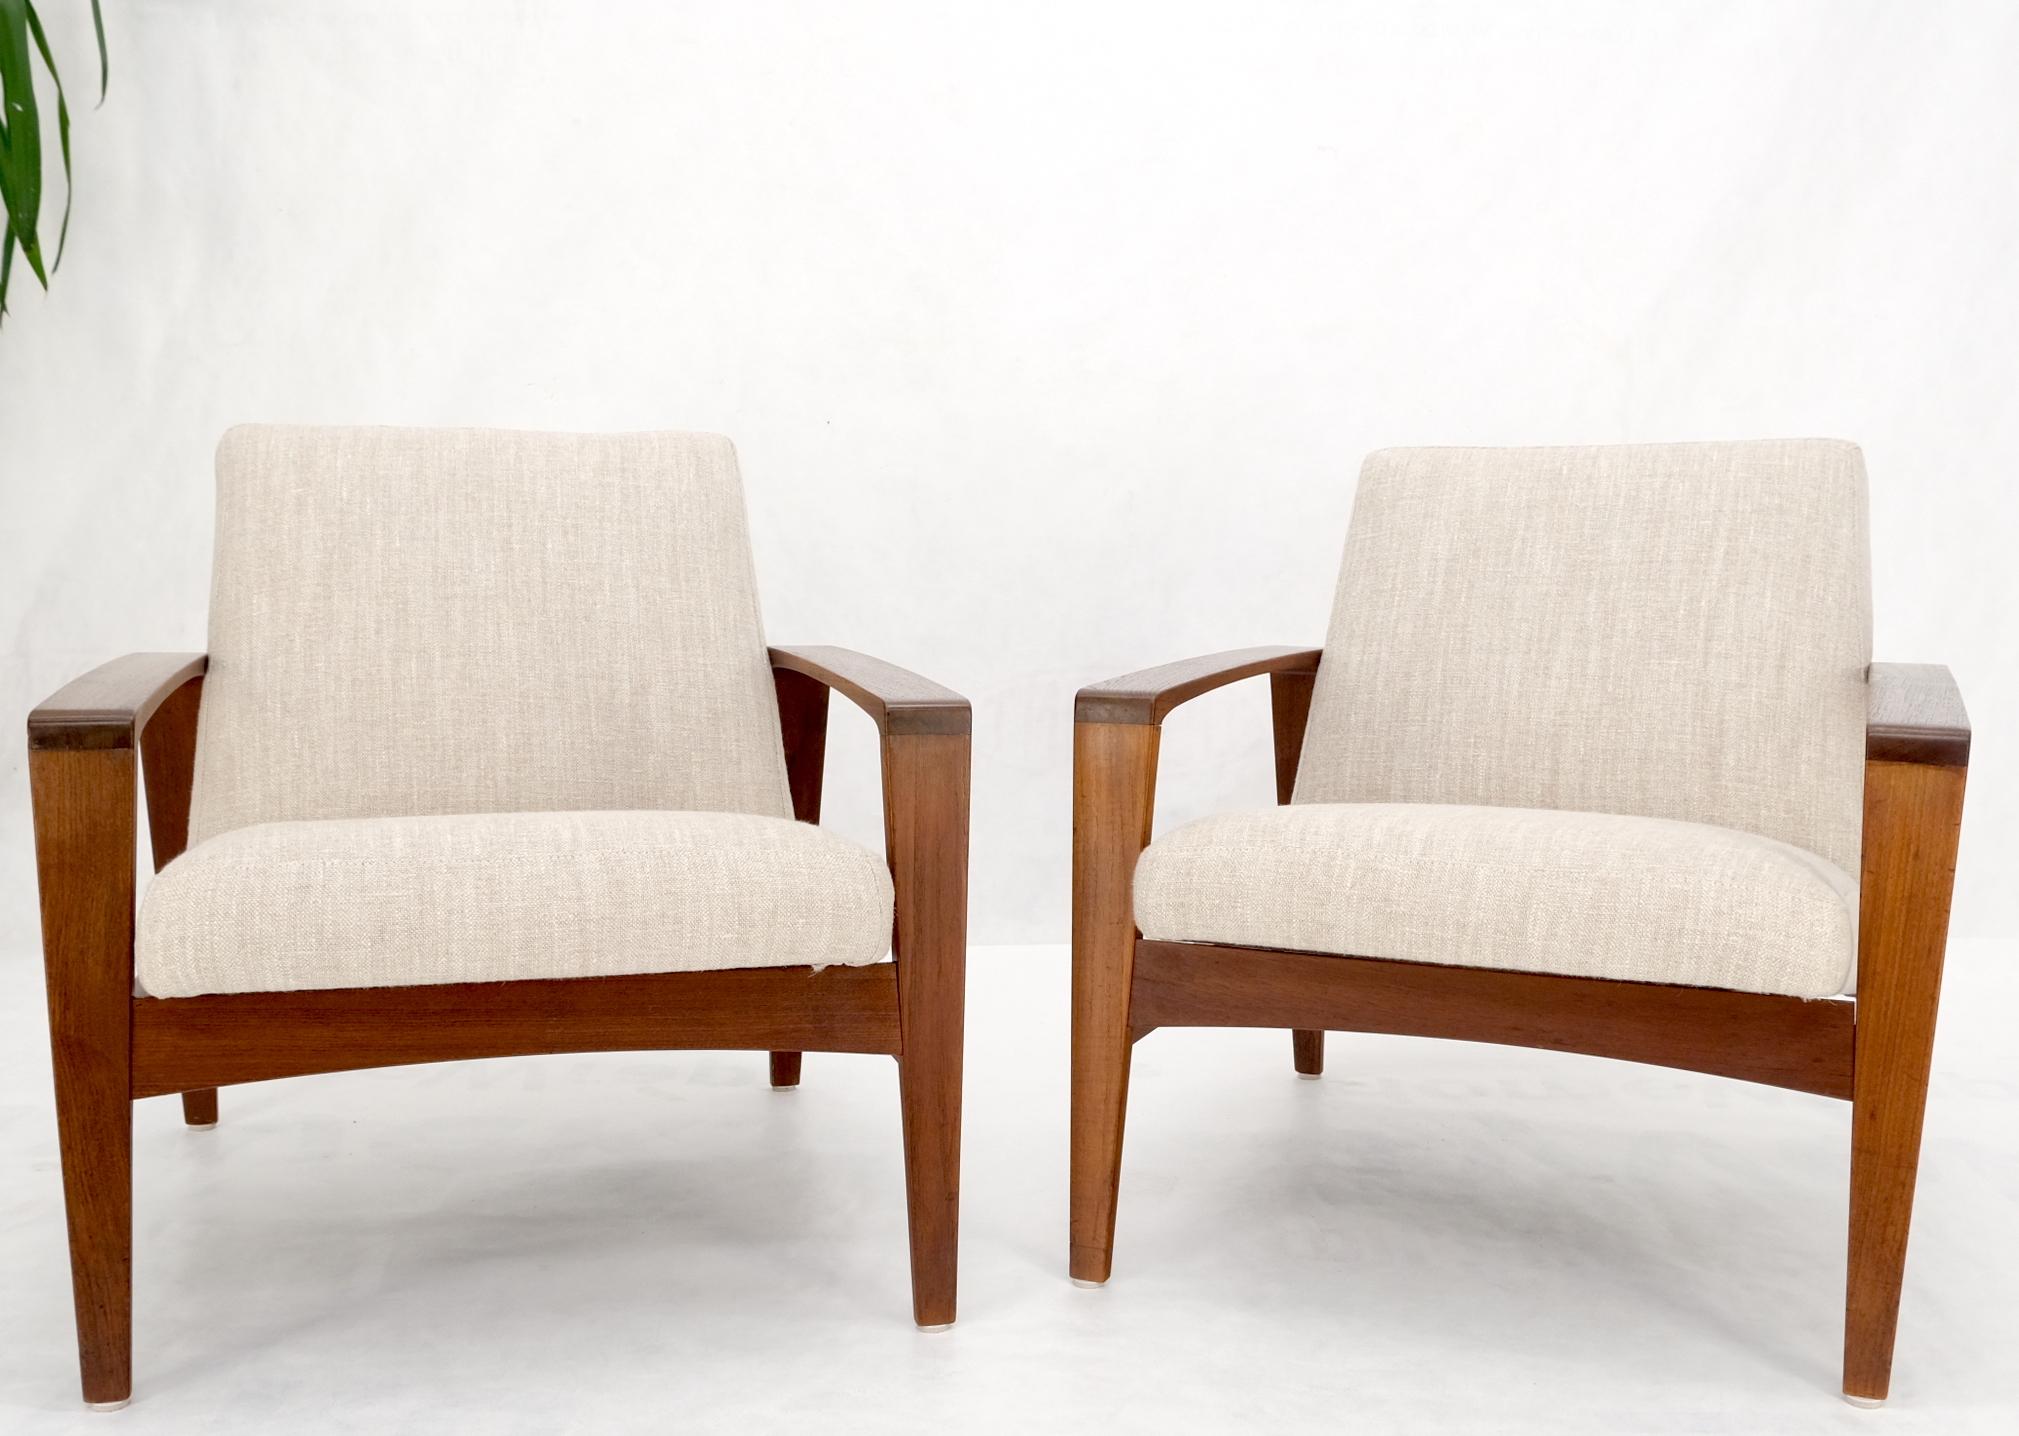 Pair Restored New Oatmeal Upholstery Teak Mid-Century Modern Lounge Arm Chairs For Sale 12